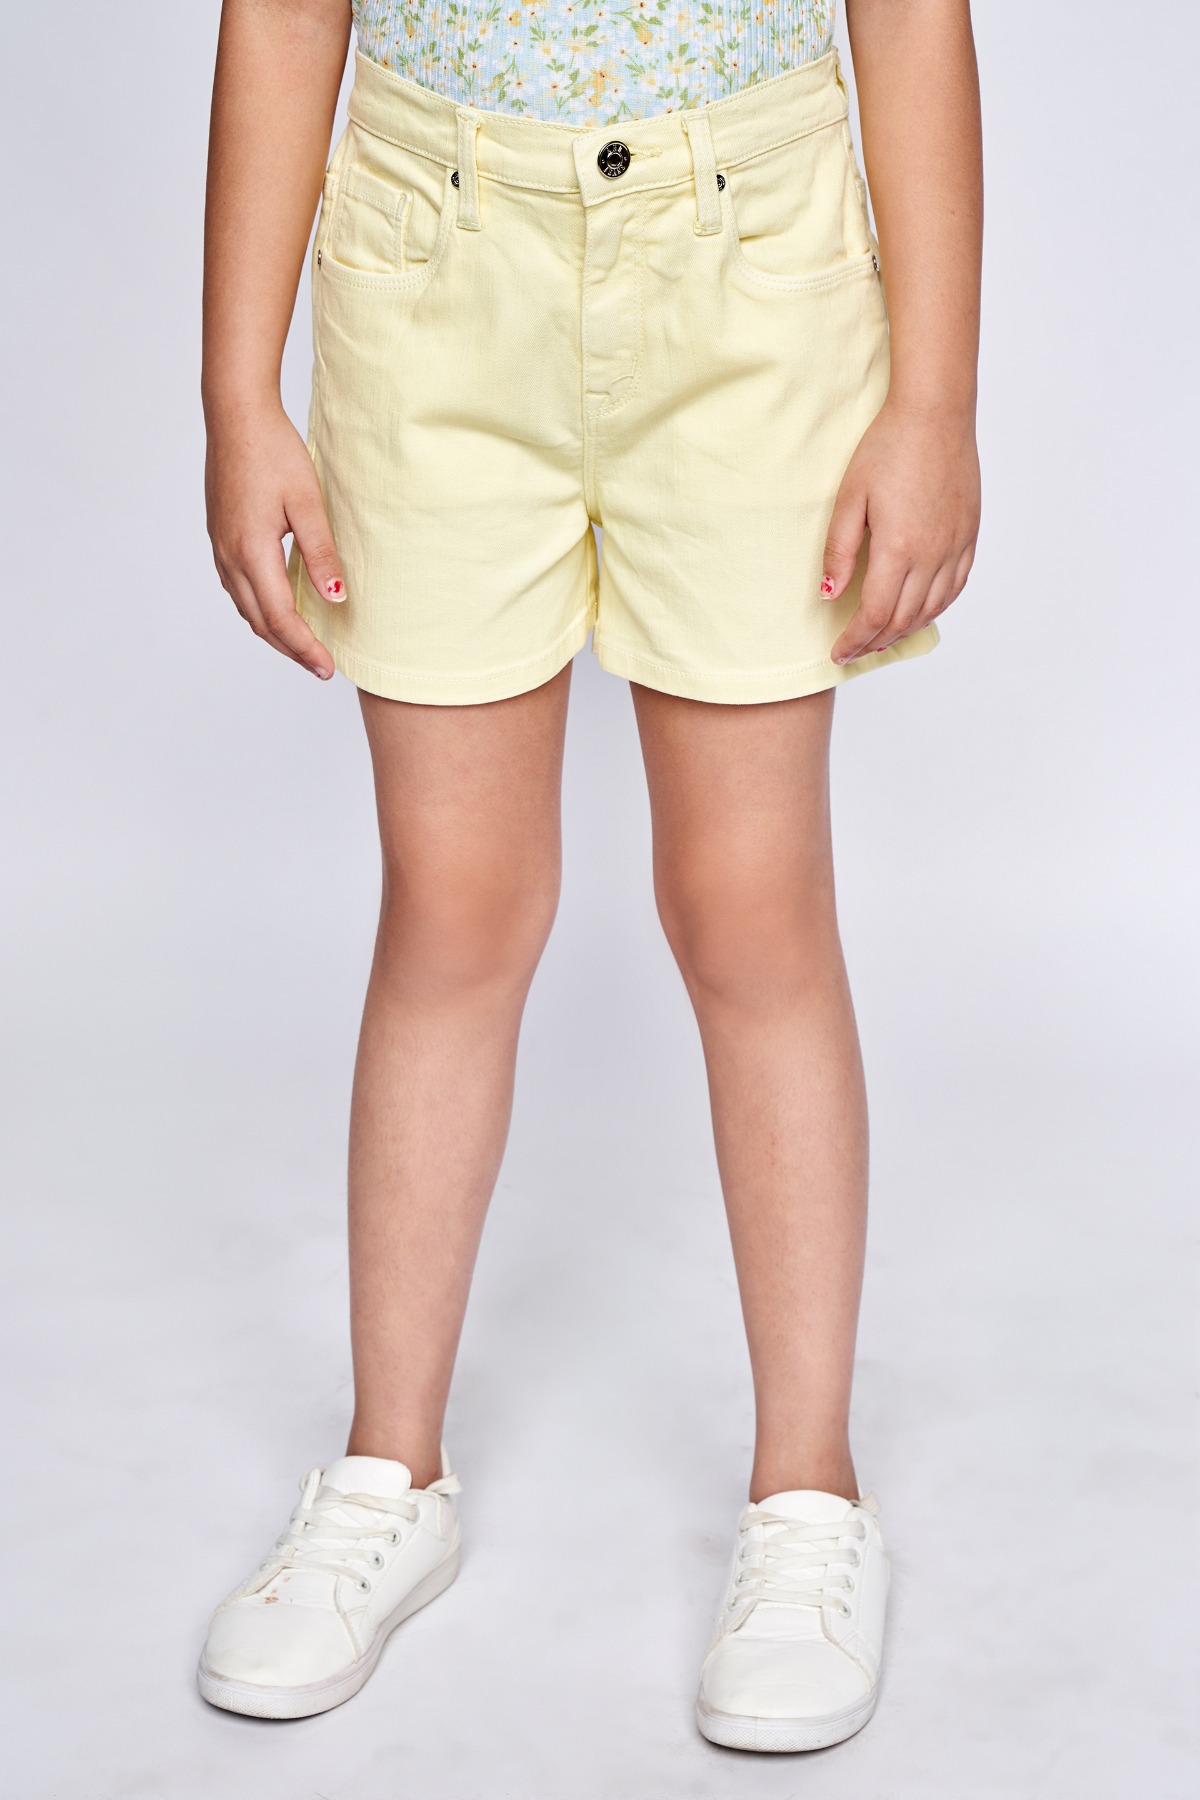 3 - Yellow Solid Straight Shorts, image 1